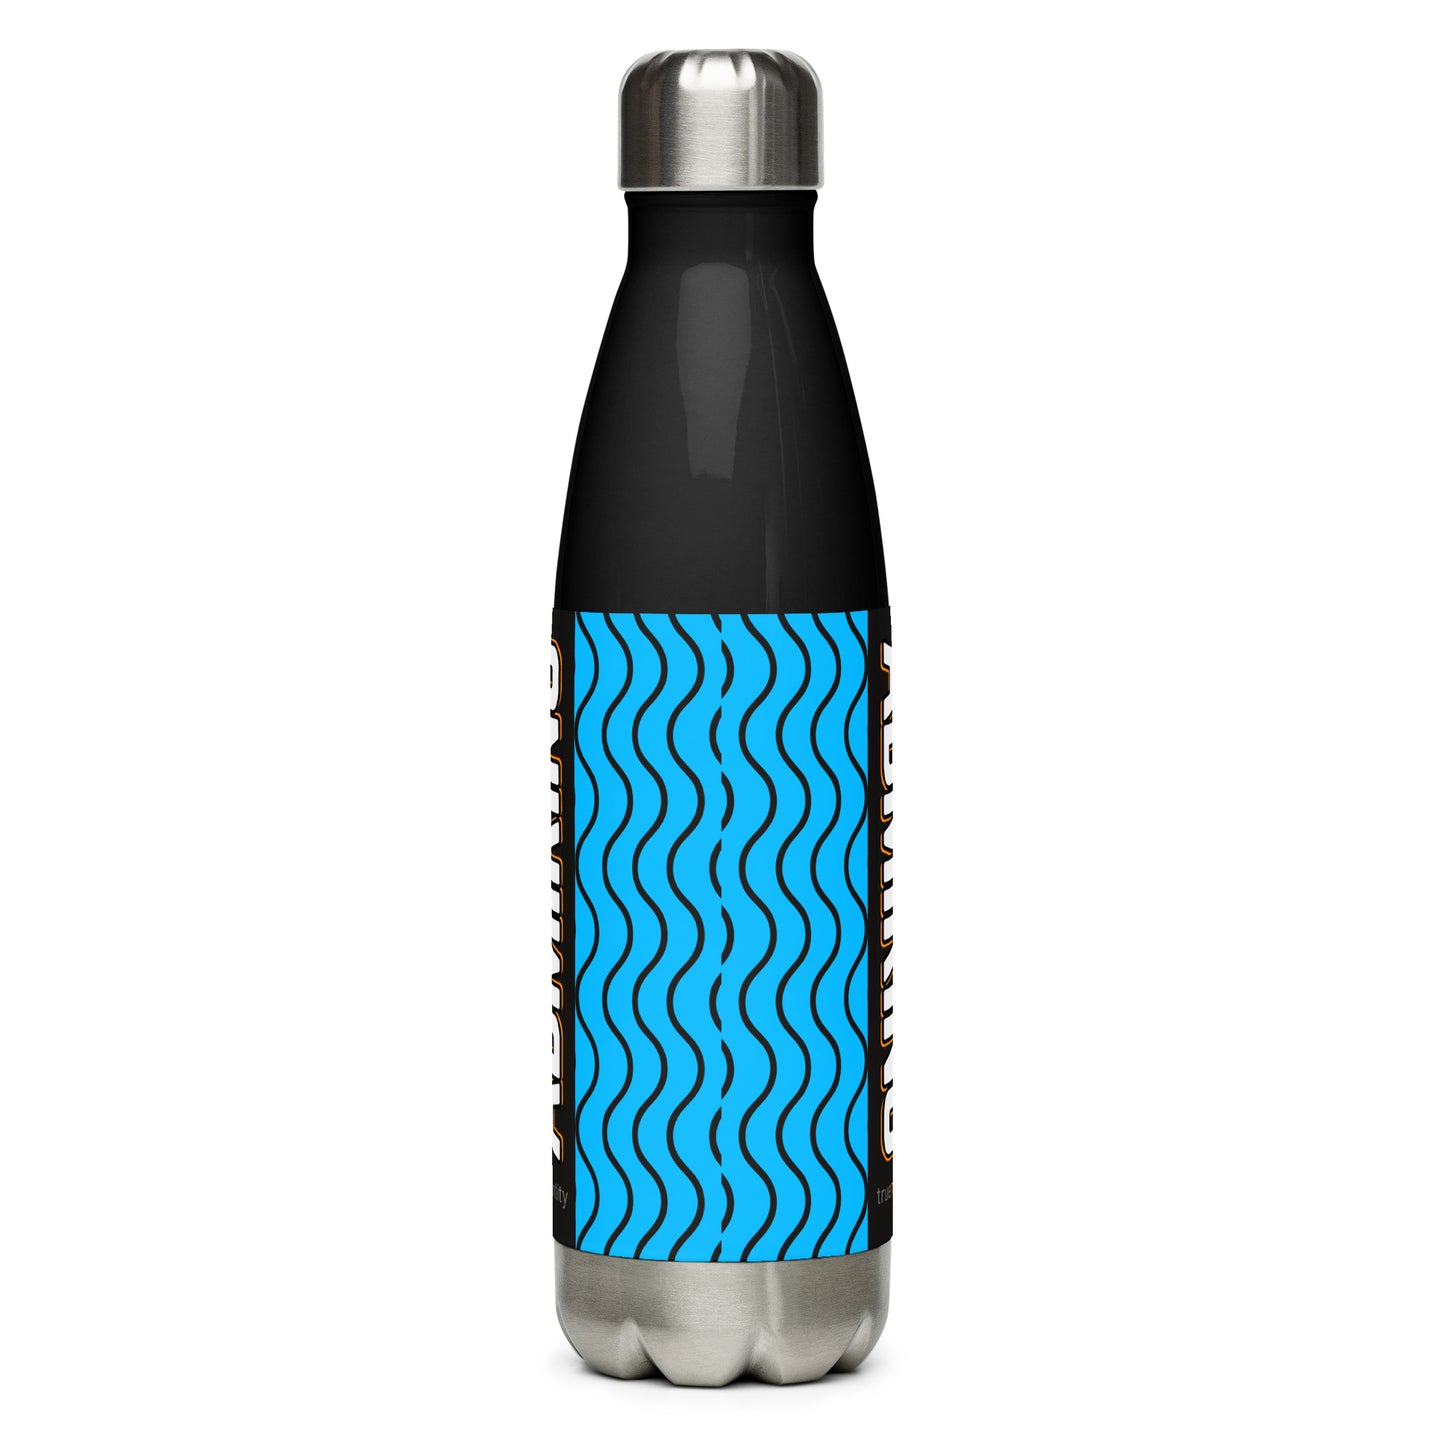 ADMIRING Stainless Steel Water Bottle Blue Wave Design, 17 oz, in Black or White